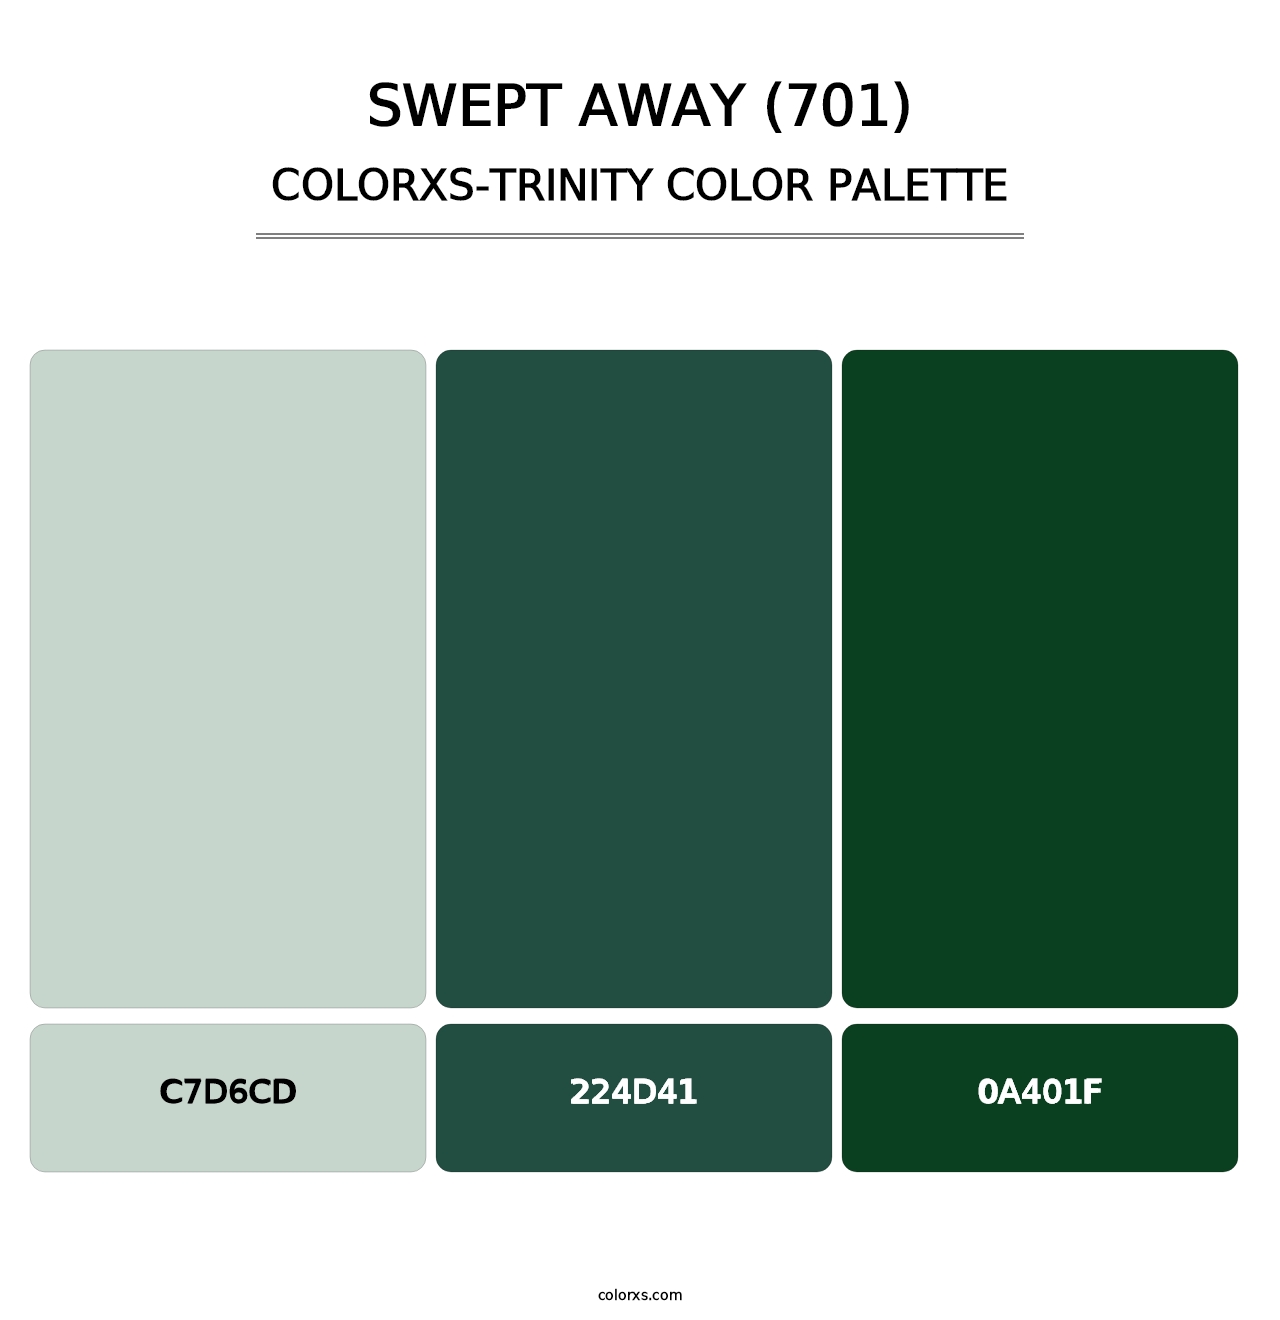 Swept Away (701) - Colorxs Trinity Palette